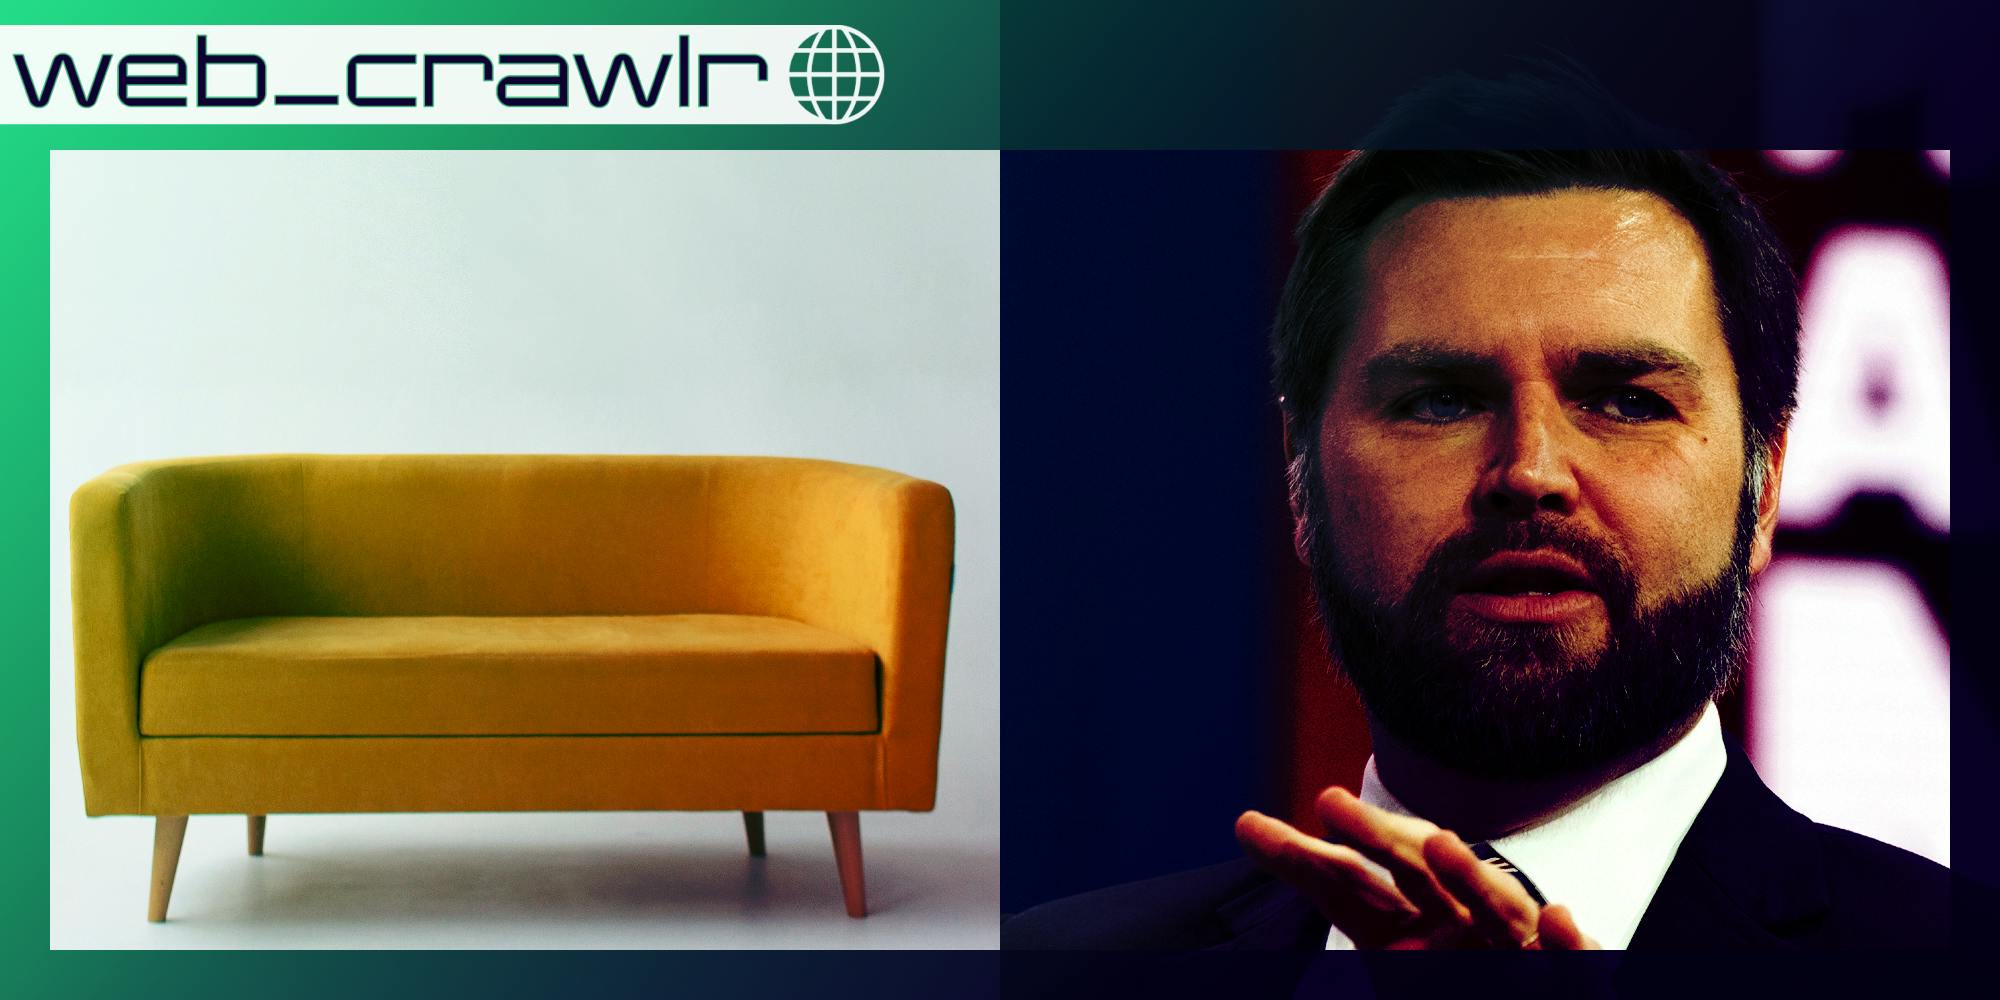 A couch next to JD Vance. The Daily Dot newsletter web_crawlr logo is in the top left corner.